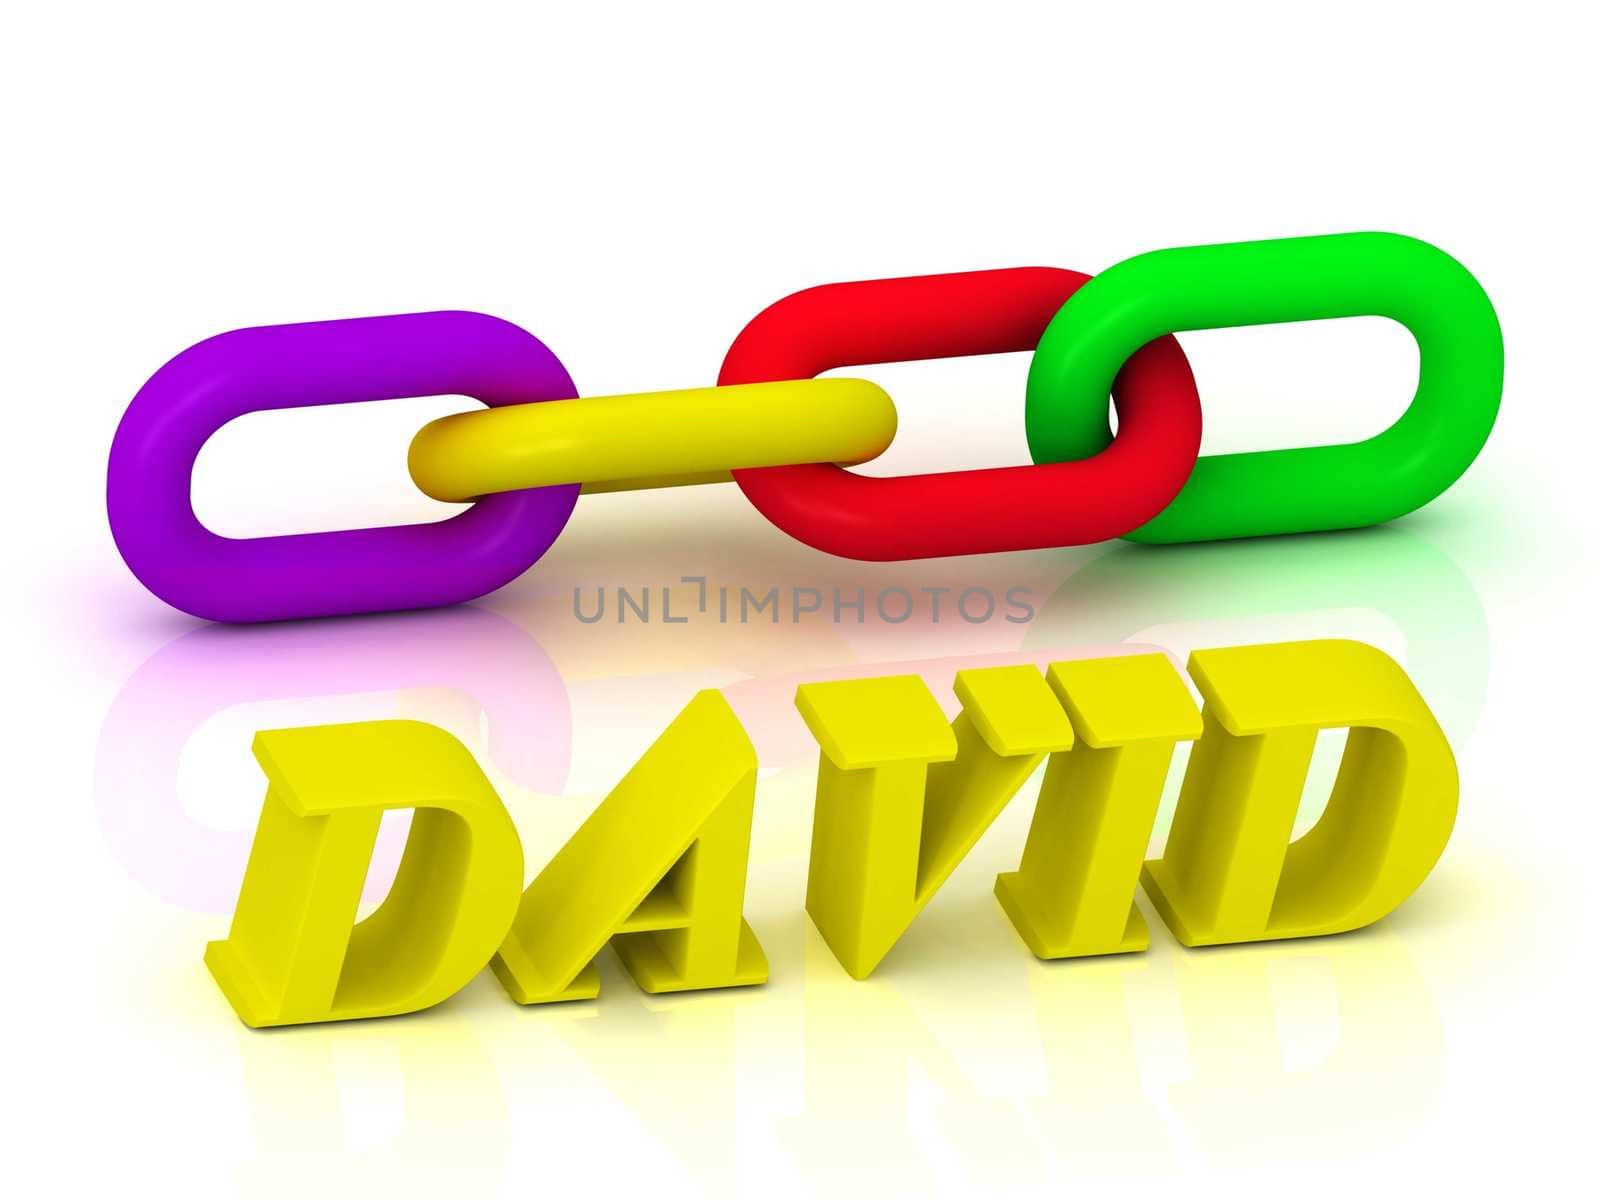 DAVID- Name and Family of bright yellow letters and chain of green, yellow, red section on white background